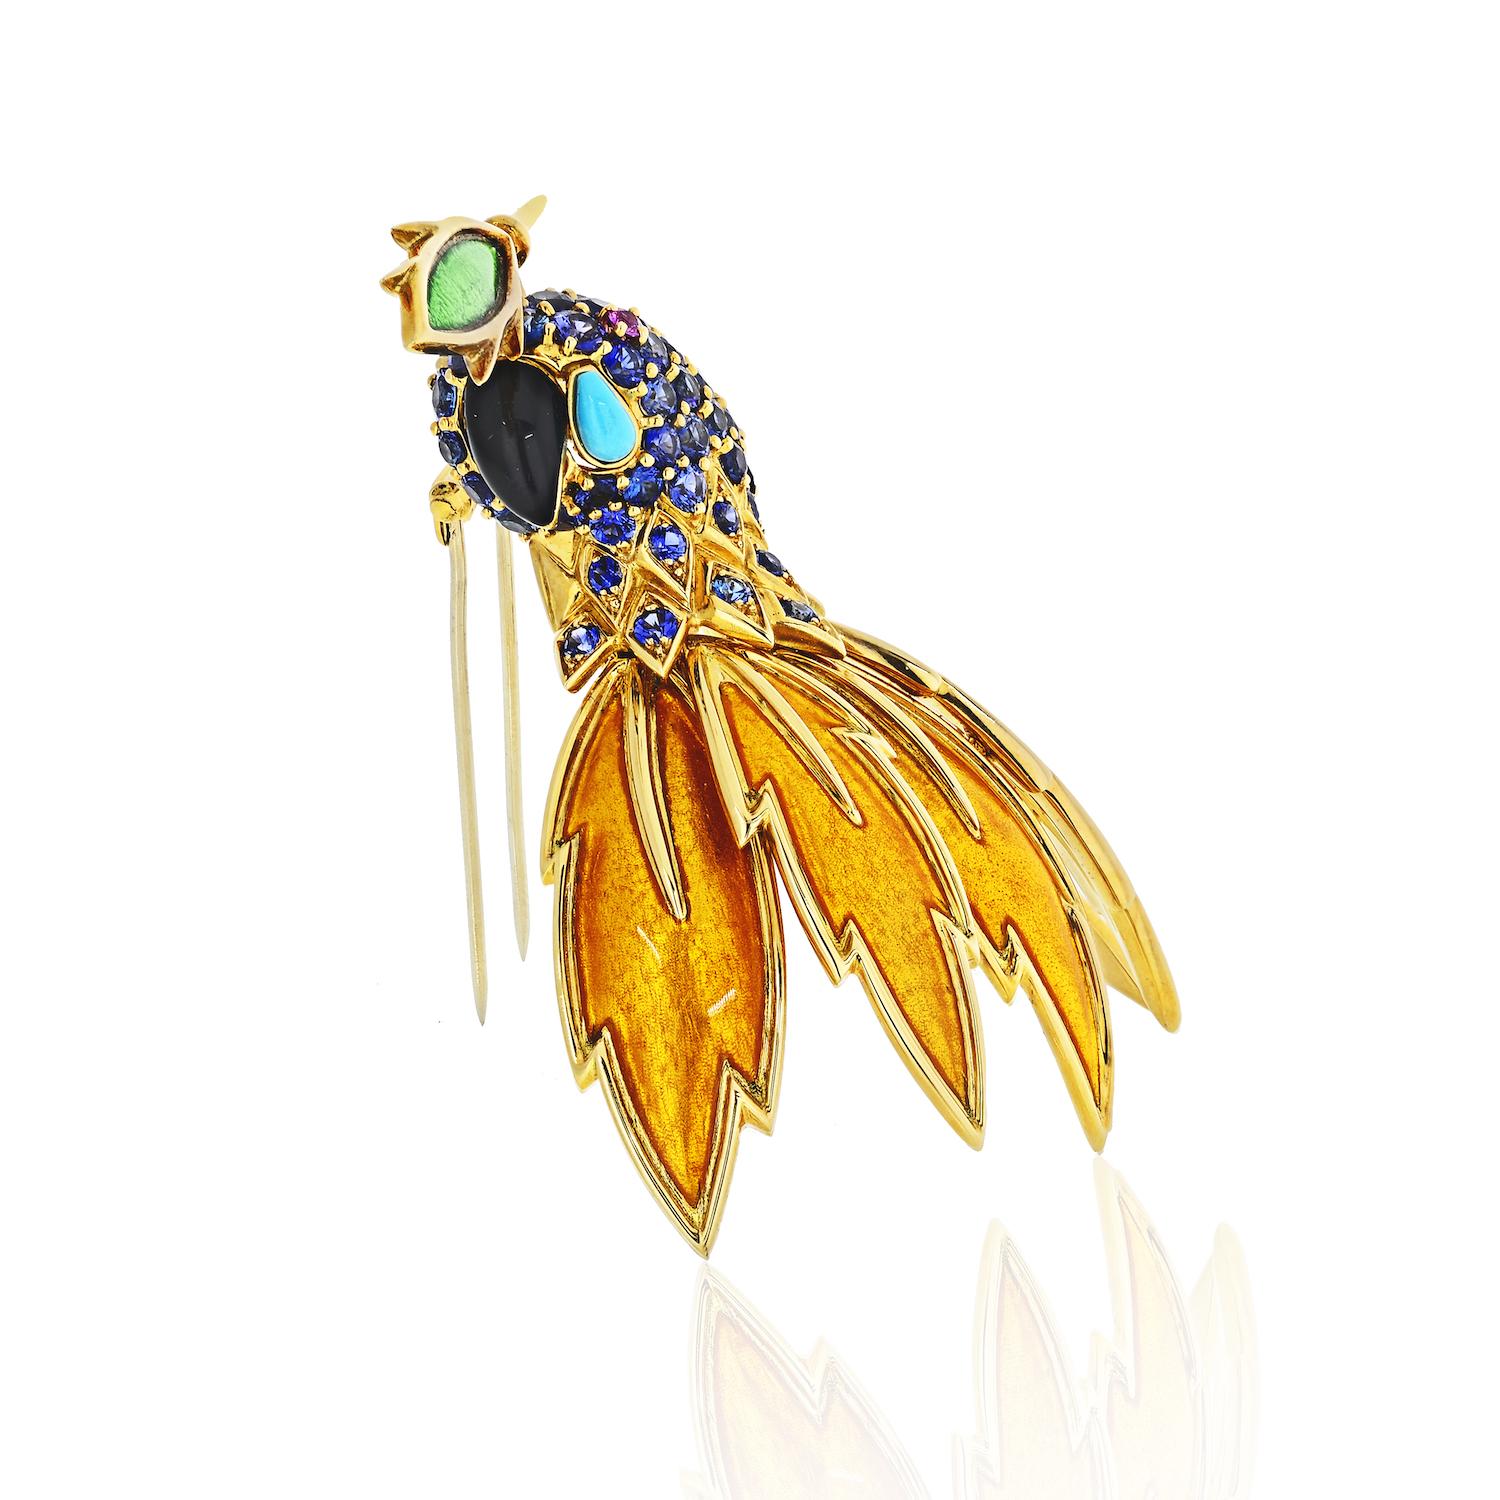 AN ENAMEL AND MULTI-GEM PARROT BROOCH, BY JEAN SCHLUMBERGER, TIFFANY & CO.

The circular-cut sapphire head with a black enamel beak, a circular-cut ruby eye and cabochon turquoise detail, accented by a serrated green enamel leaf, the body designed